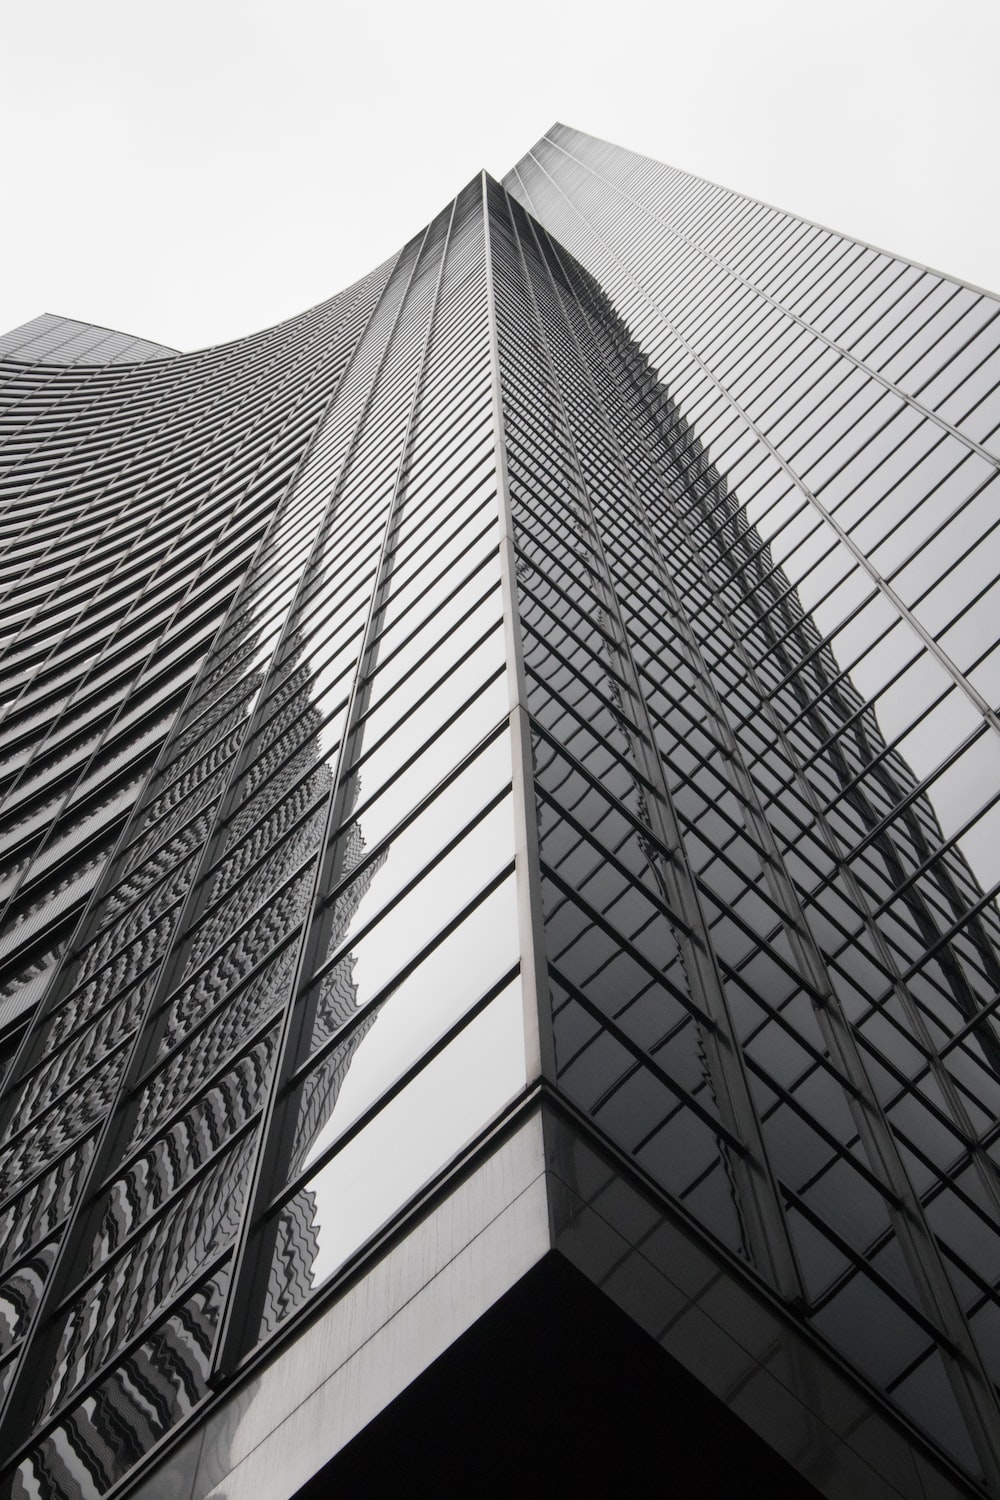 Grey Curtain Building During Daytime Photo Seattle Image On